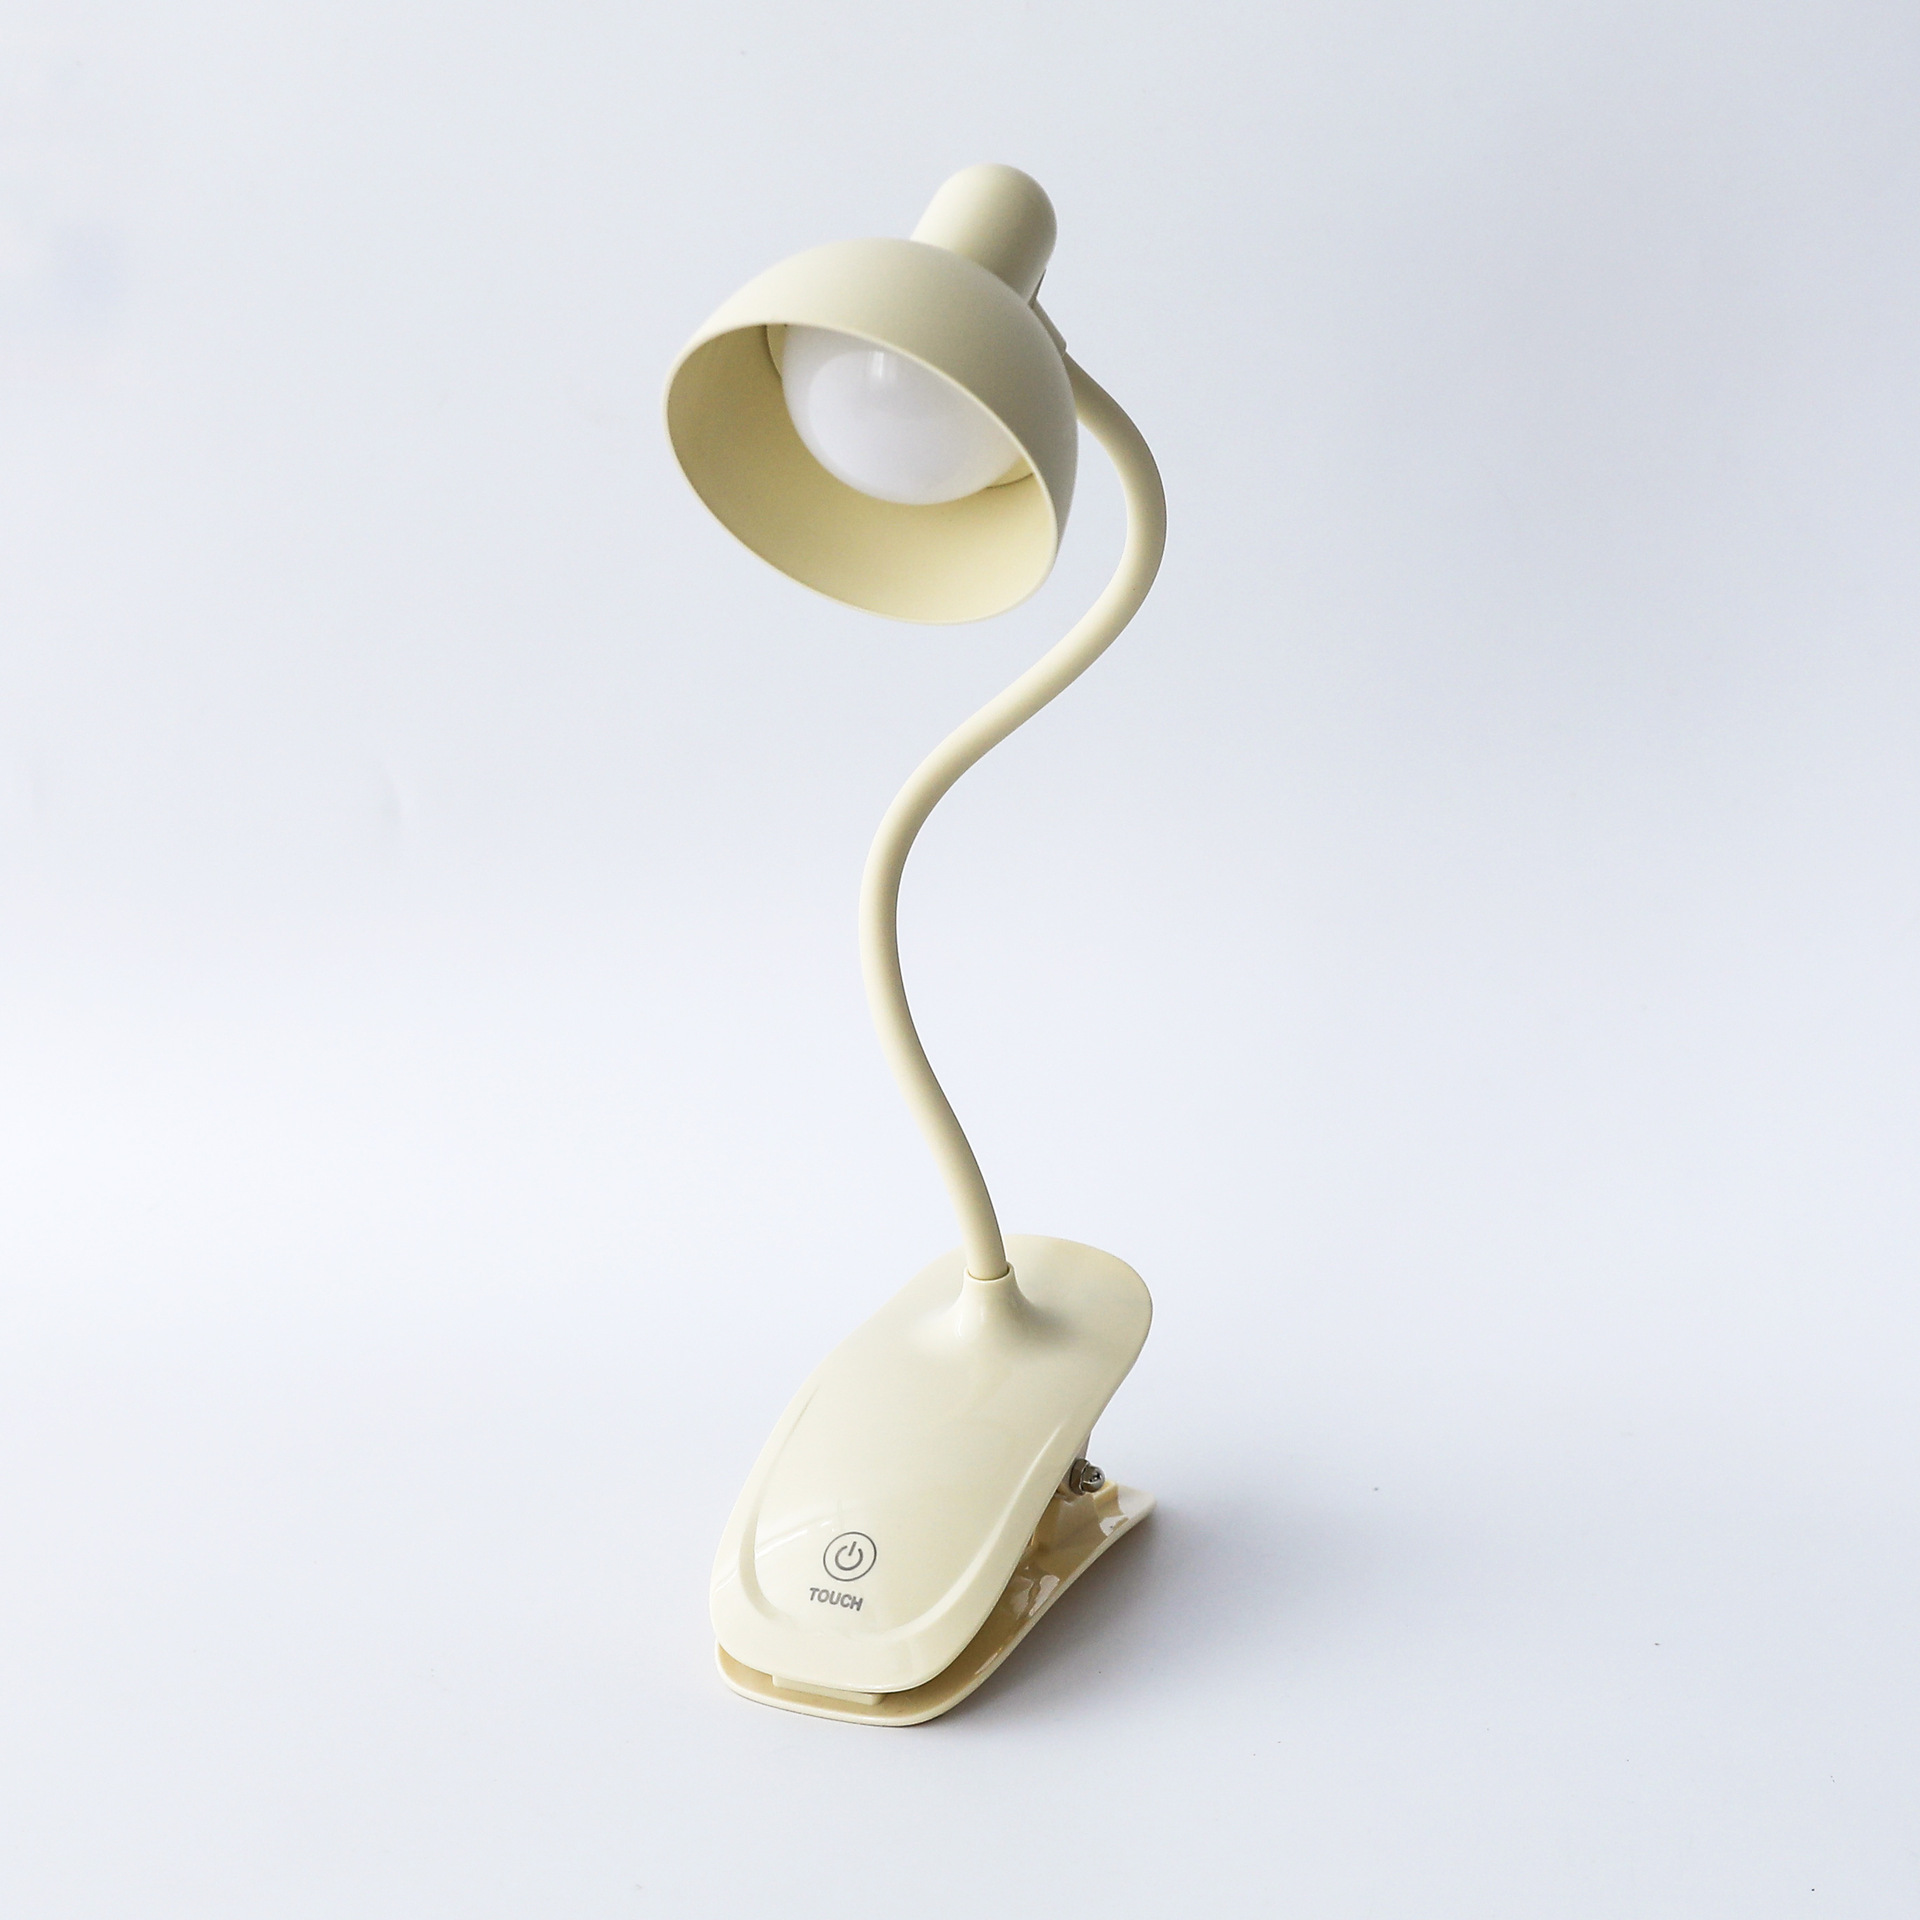 Creative Bedside-Use Reading Bedroom Desk Reading Universal Soft Arm Touch Dimming Clip Led Desk Lamp Usb Rechargeable